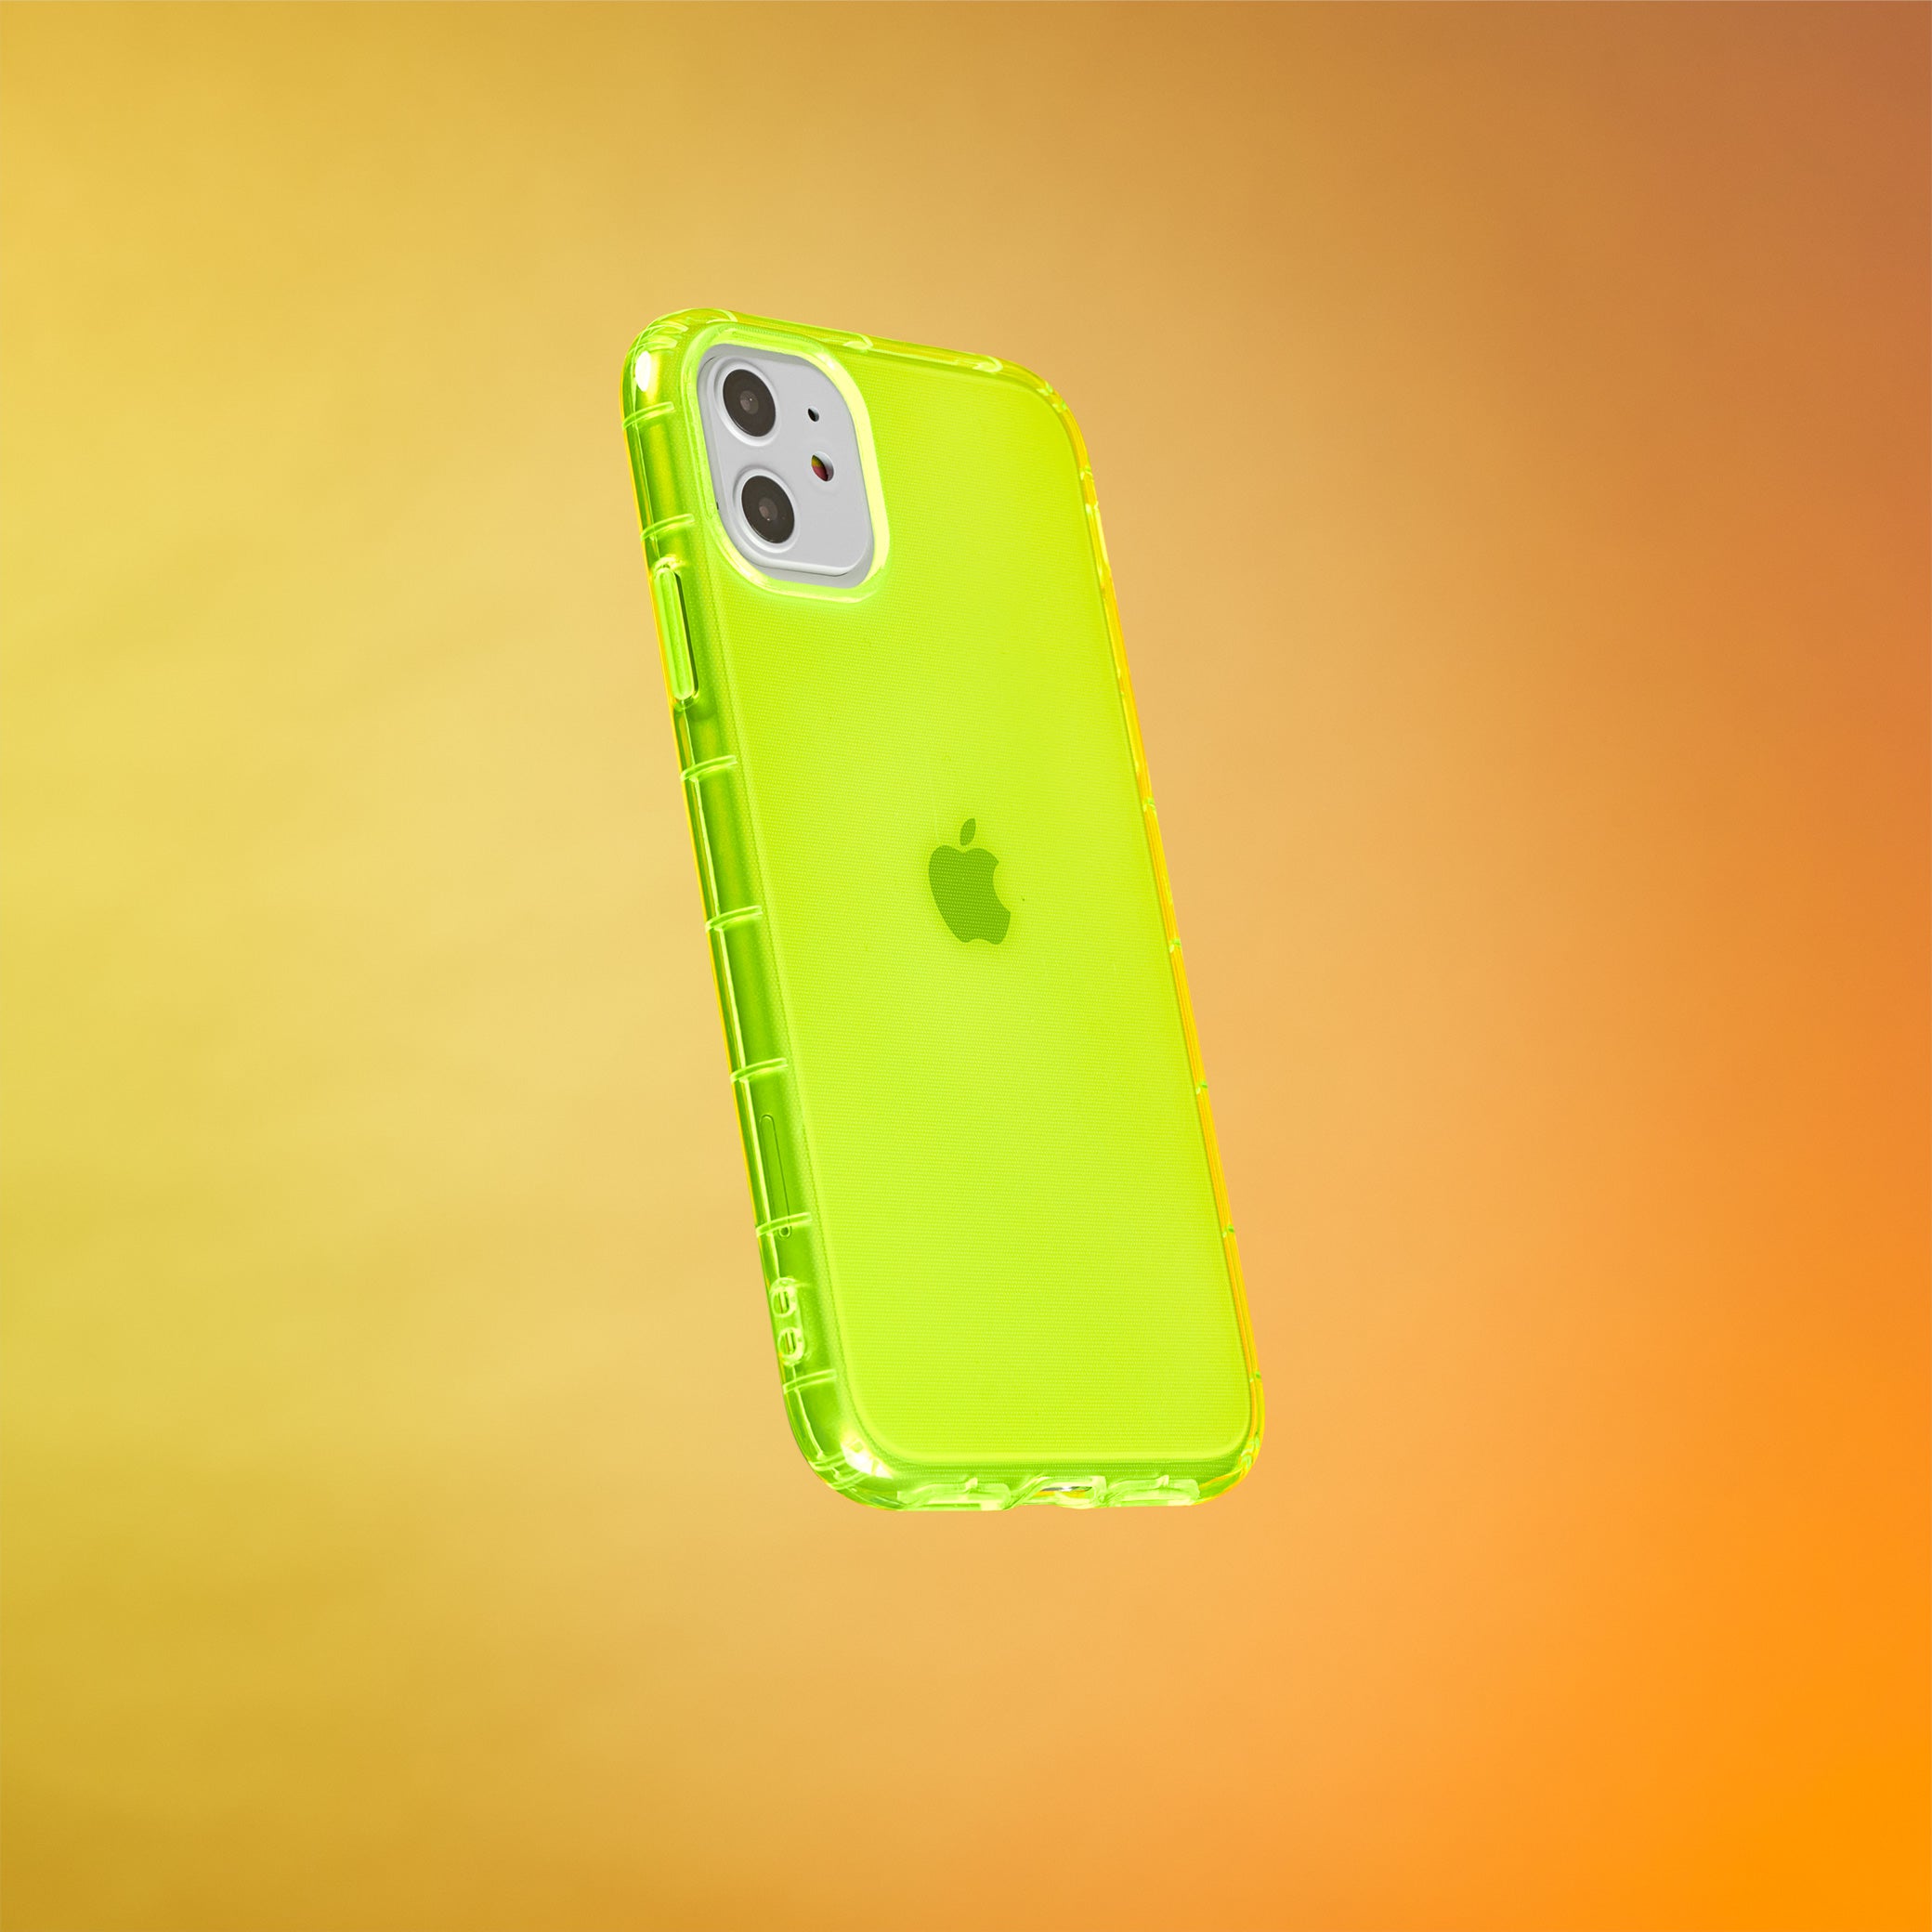 Highlighter Case for iPhone 11 - Conspicuous Neon Yellow